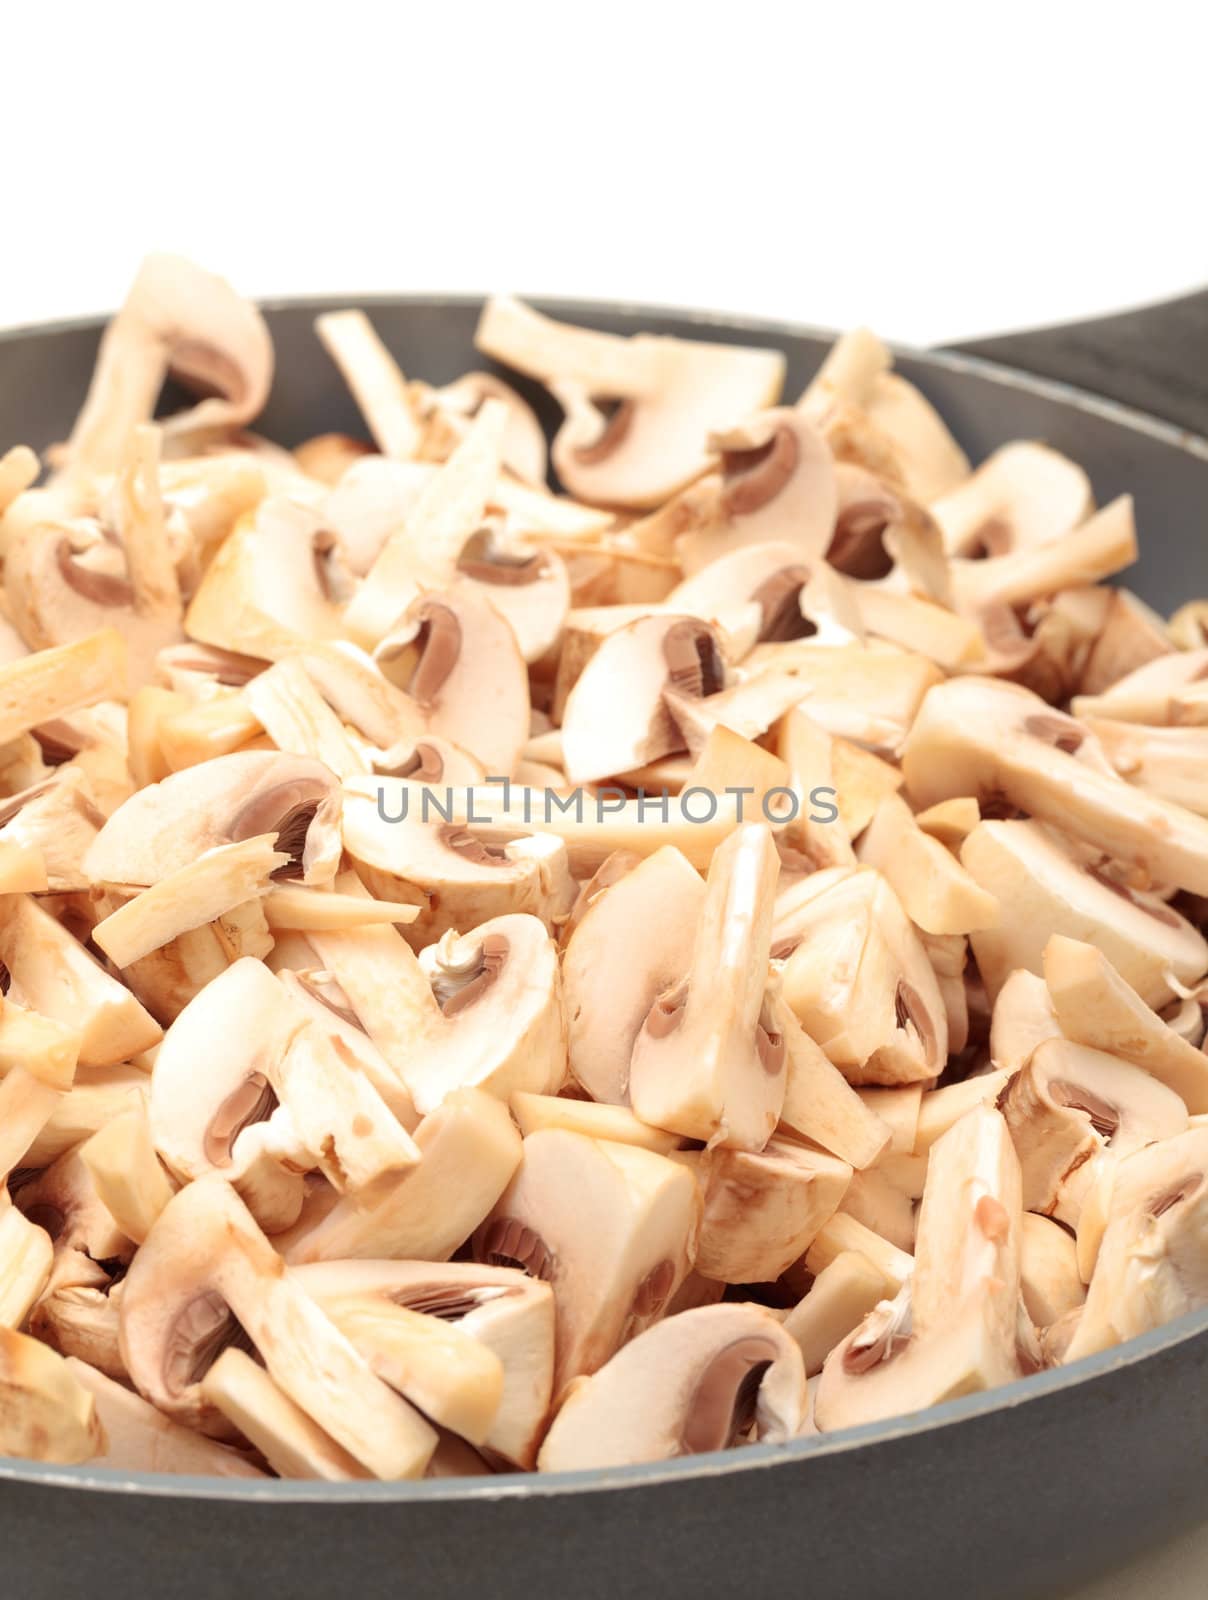 Frying Pan with the sliced Champignons closeup on a white background